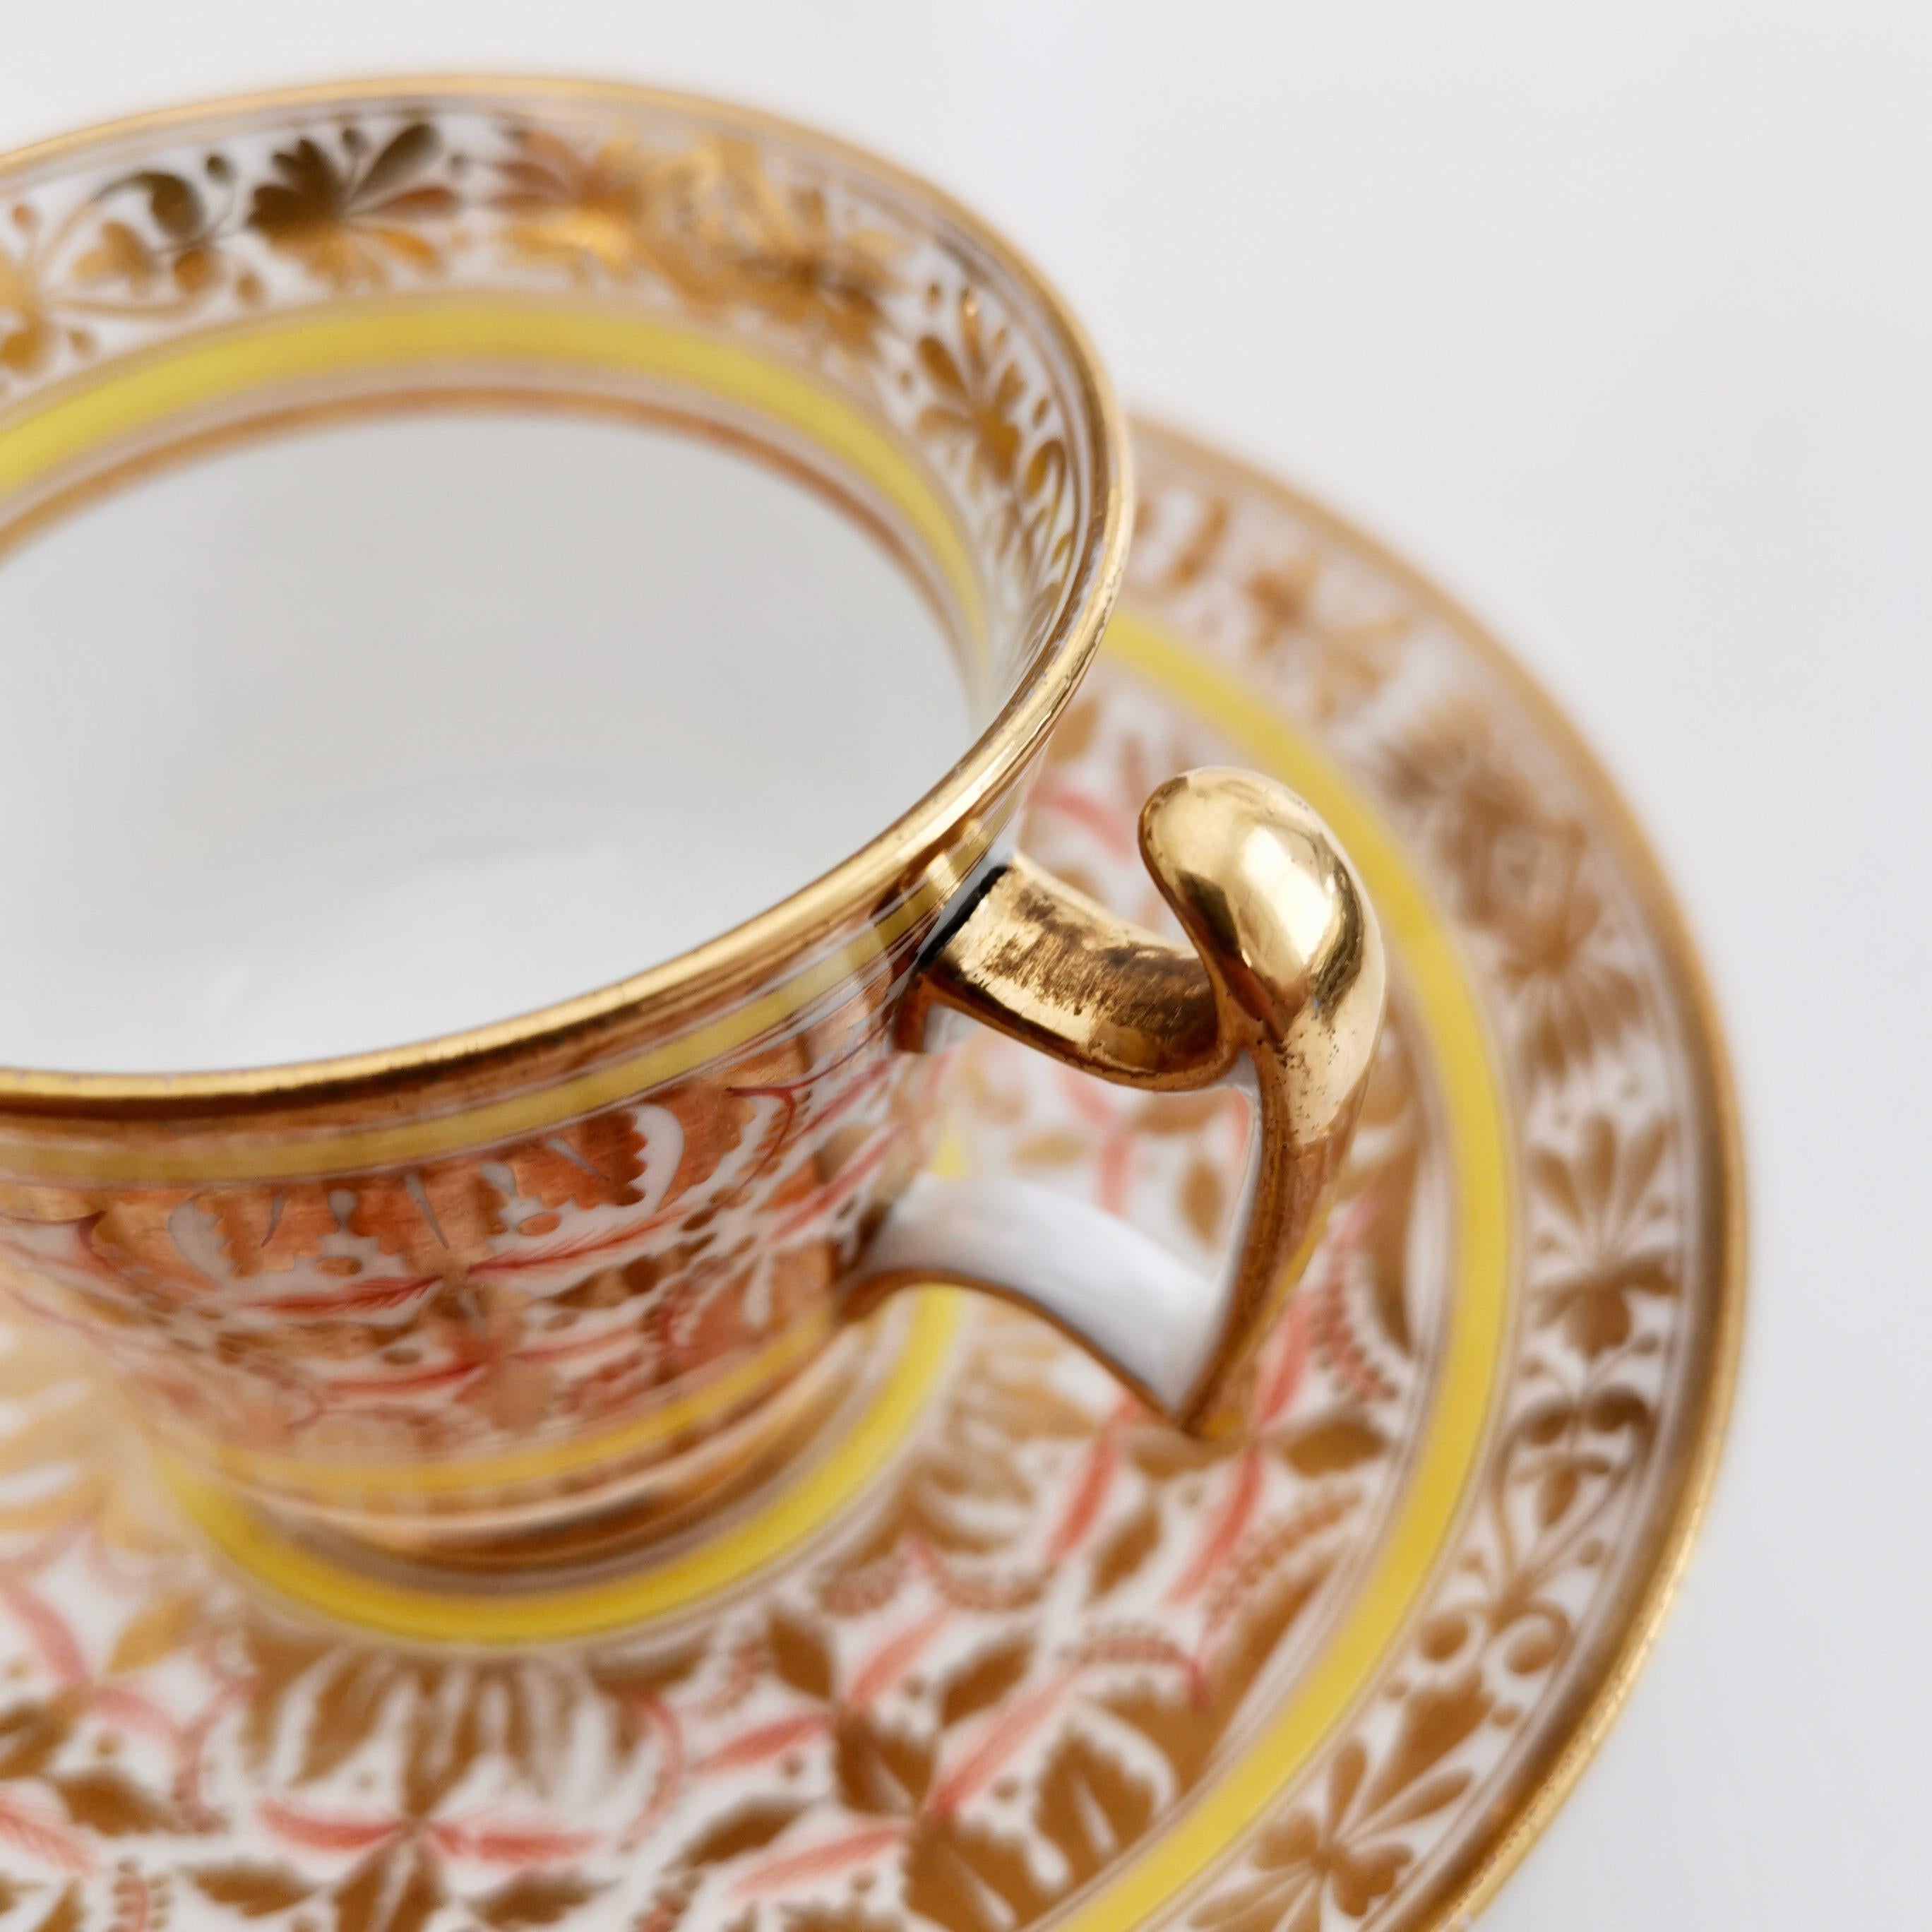 Spode Porcelain Teacup Set, Gilt, Yellow and Red Regency Pattern, circa 1815 10